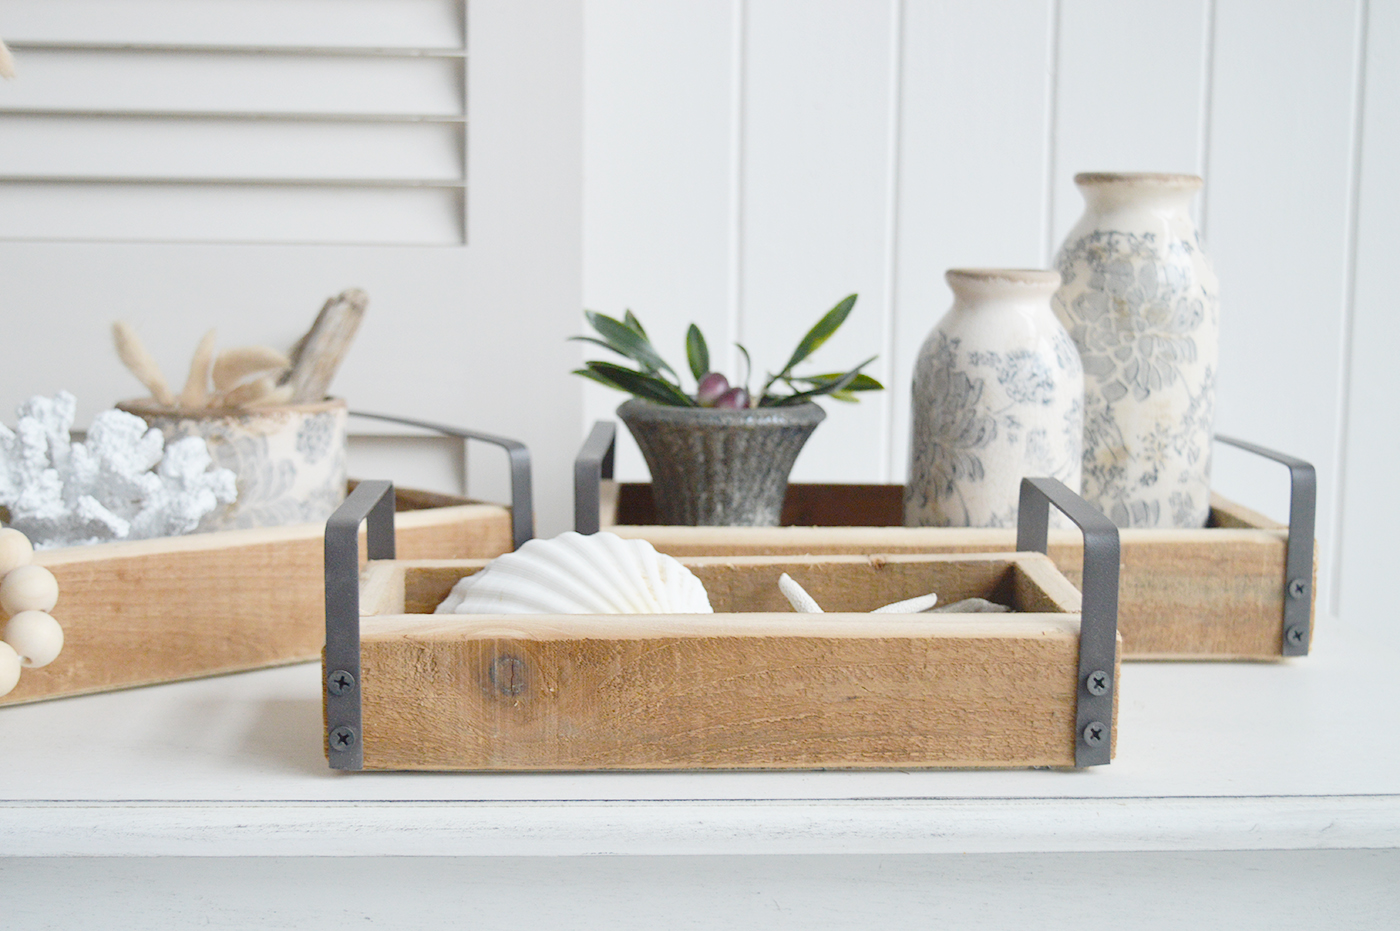 The White Lighthouse. White Furniture and accessories for the home. Set of 3 Pawtucket Wooden Trays for display in New England, Country and coastal home interior decor